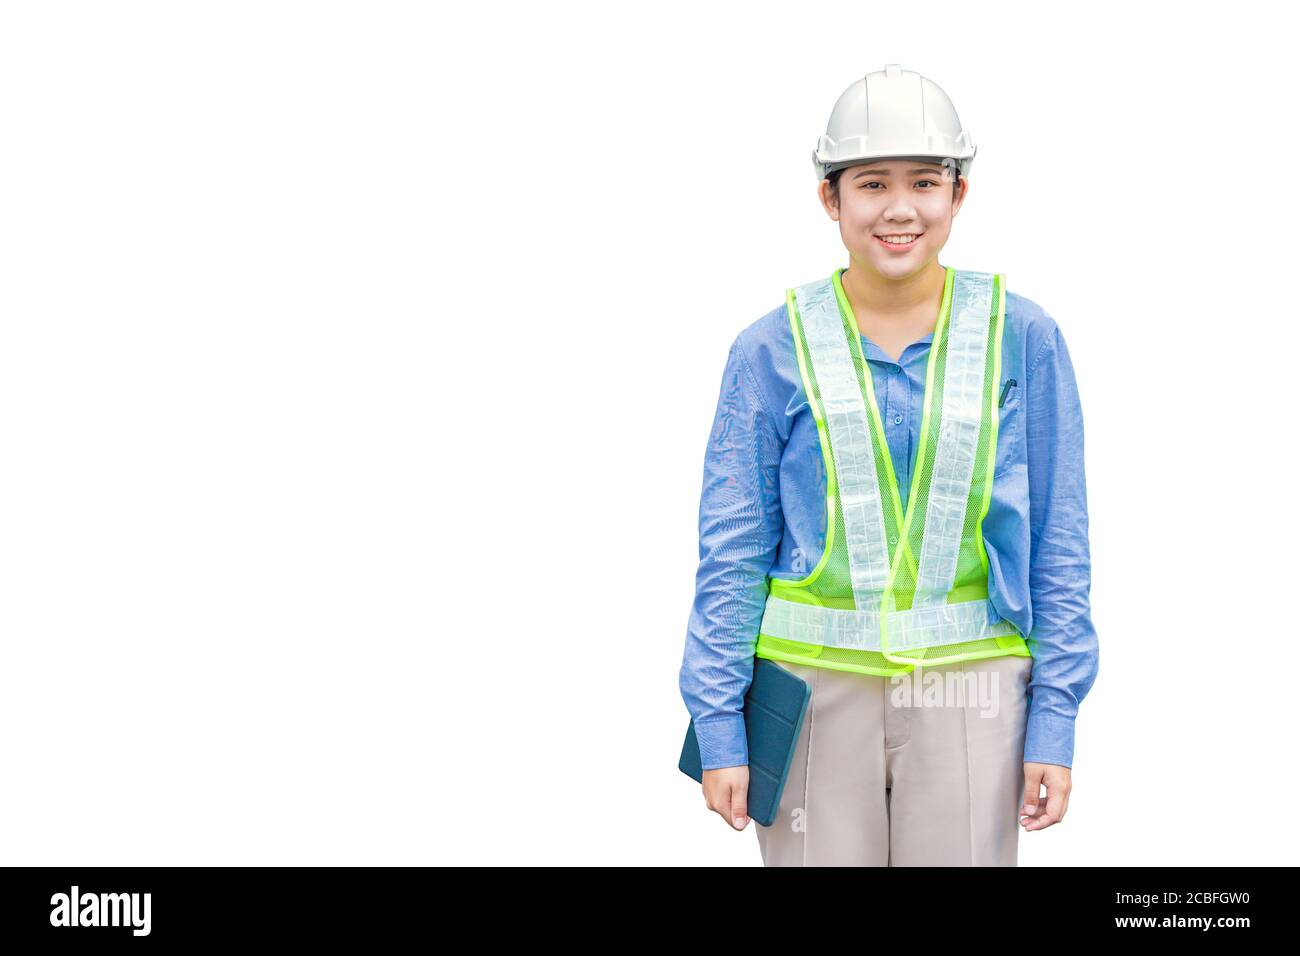 Asian woman worker industry staff foreman engineer waring safety vest reflective strip helmet hardhat smiling isolated on white background Stock Photo